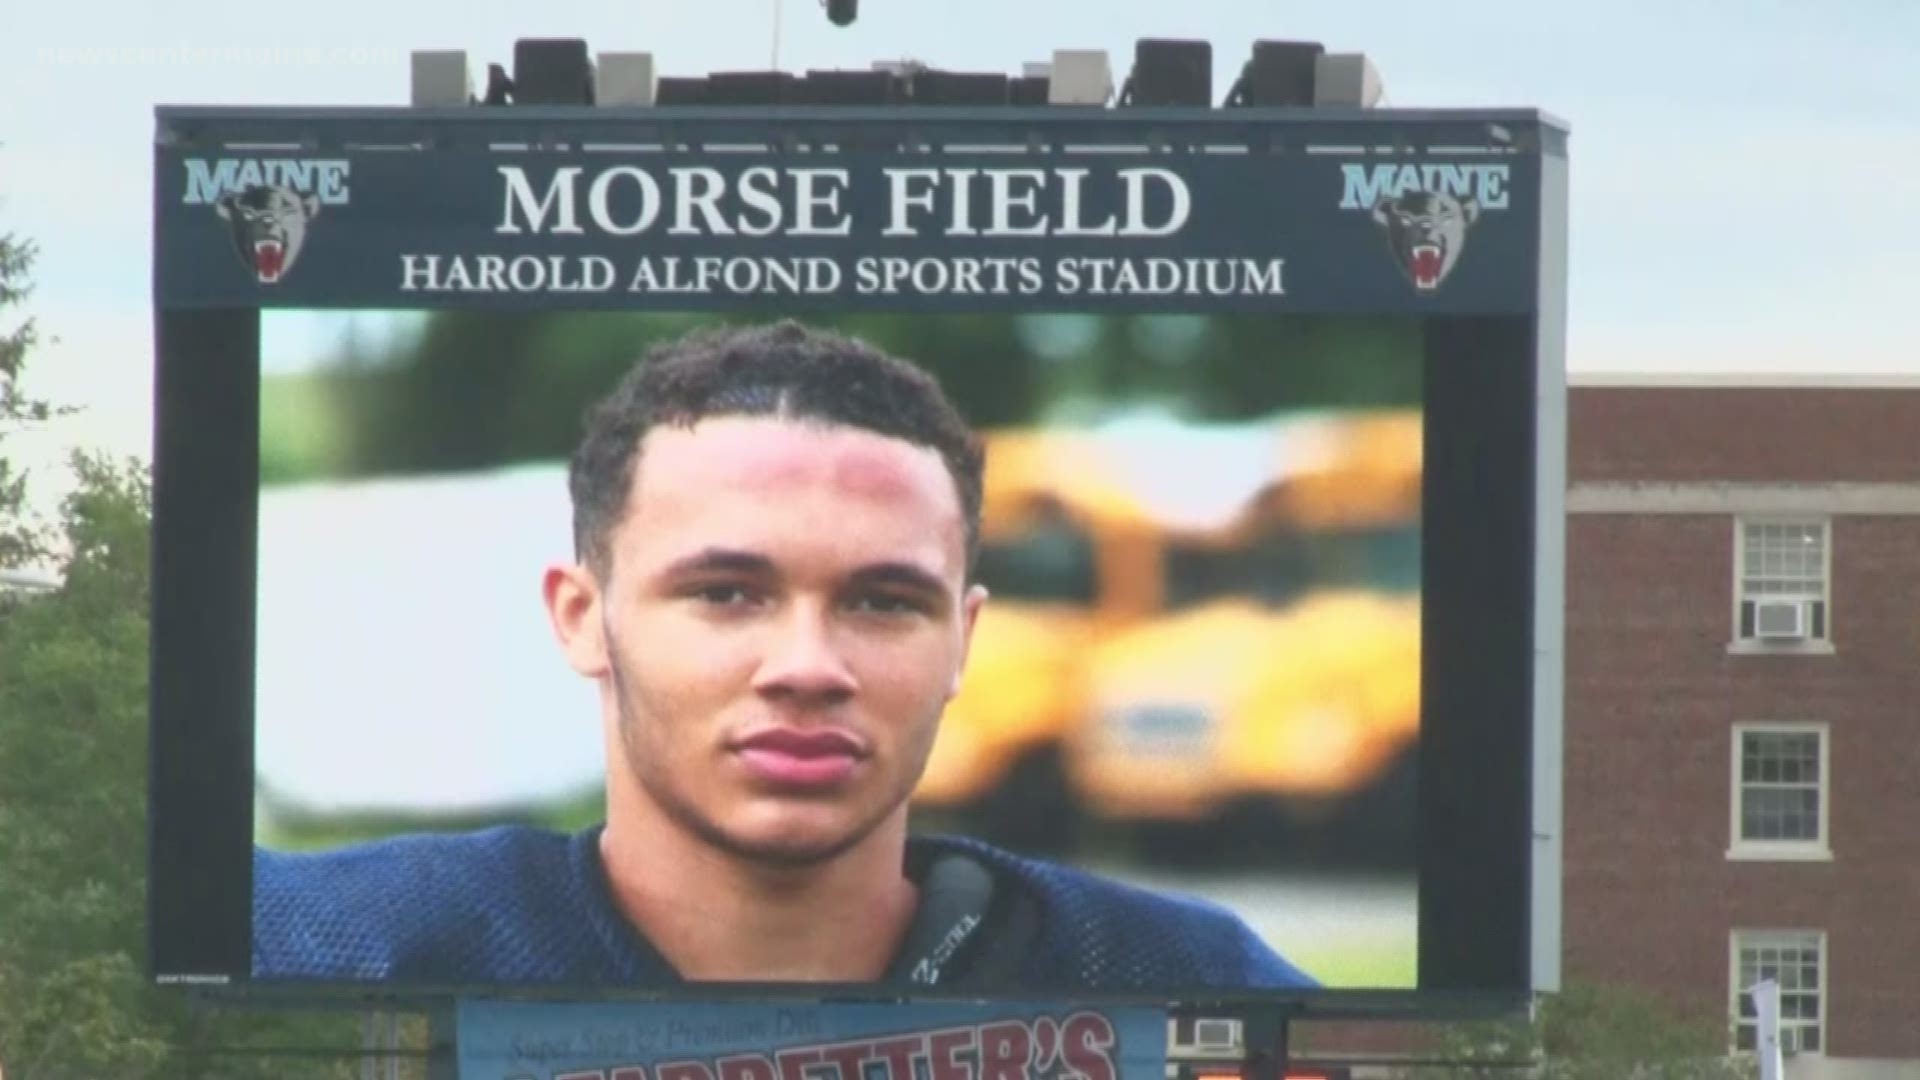 Maine opened their football season by honoring Darius Minor, the player that died during a practice this season. 